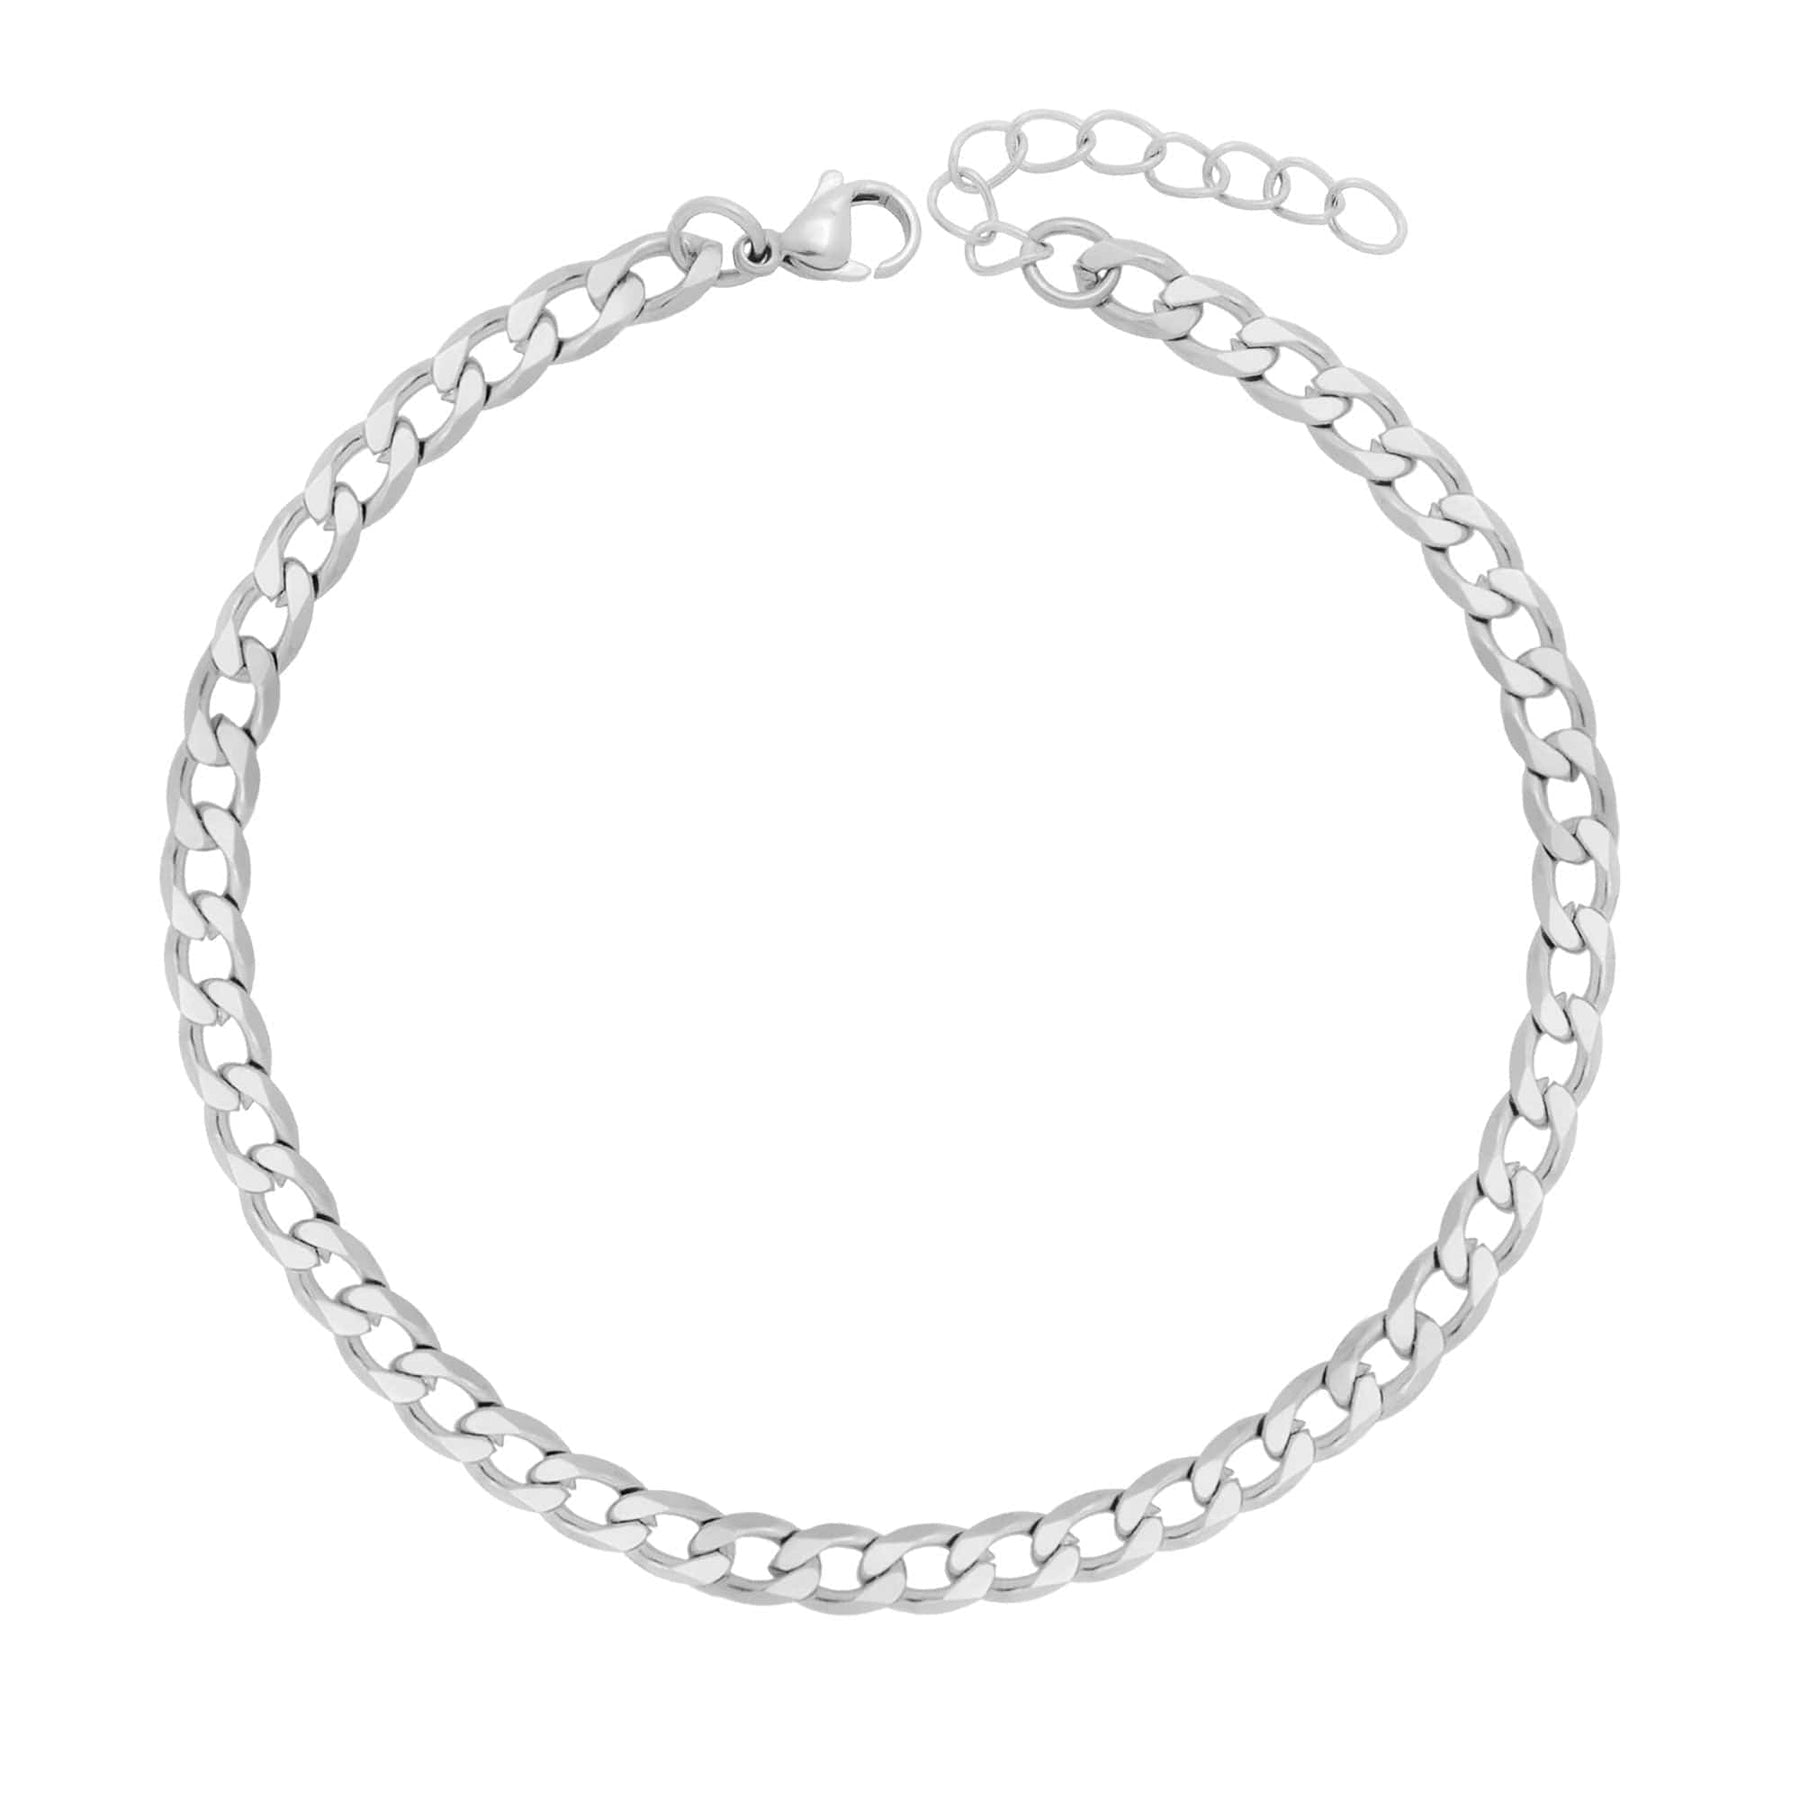 BohoMoon Stainless Steel Monica Anklet Silver